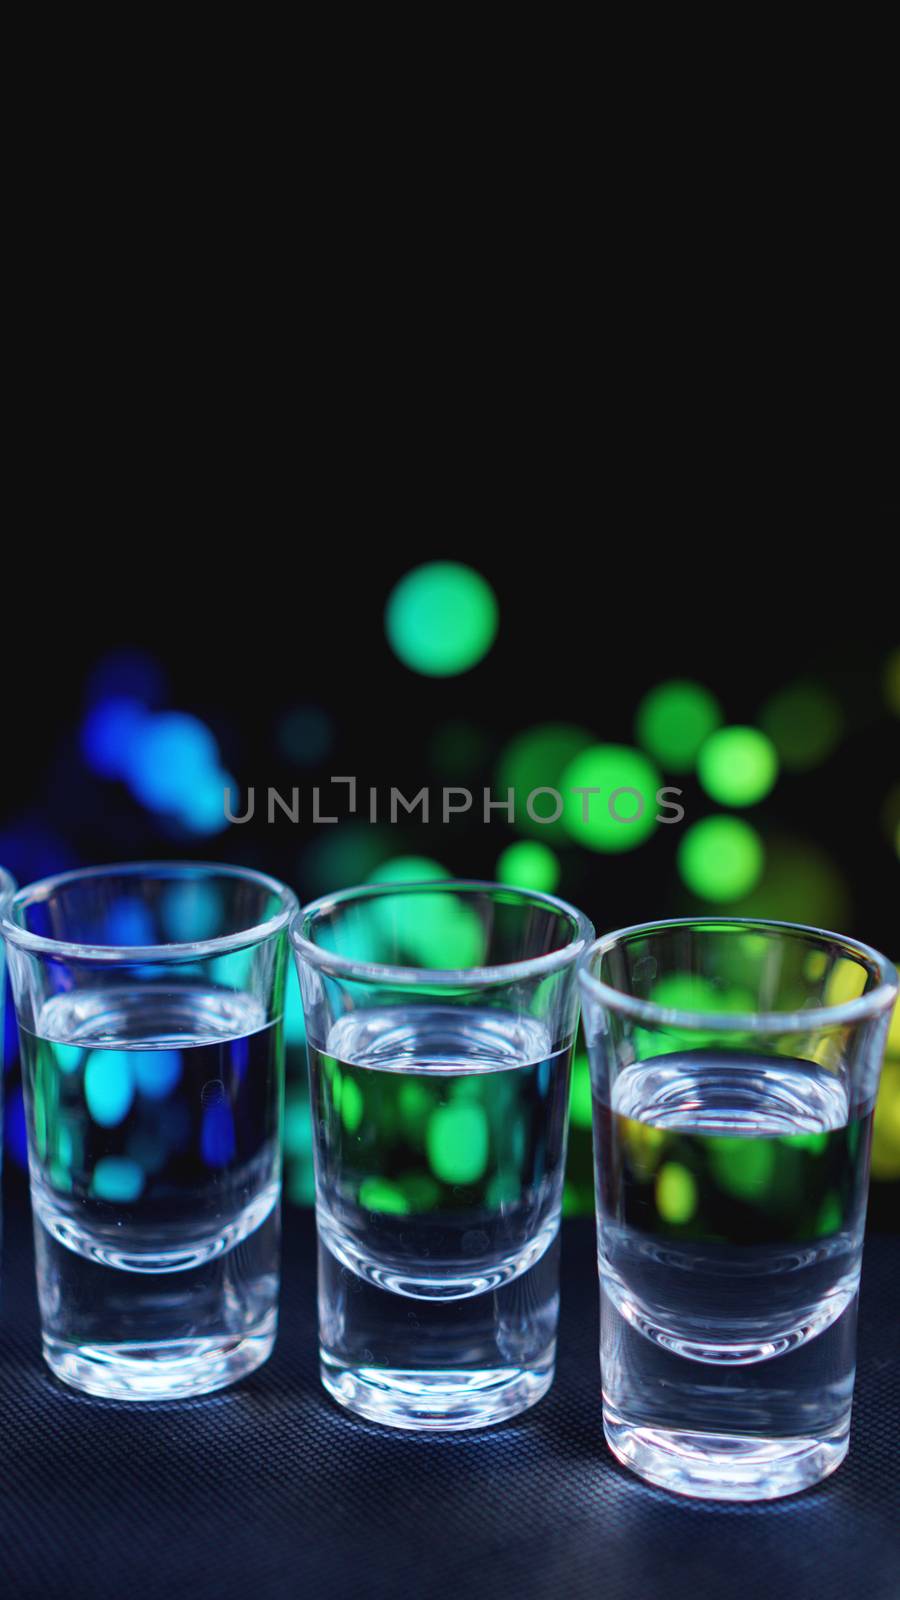 Glasses of vodka or tequila. In bar - neon background